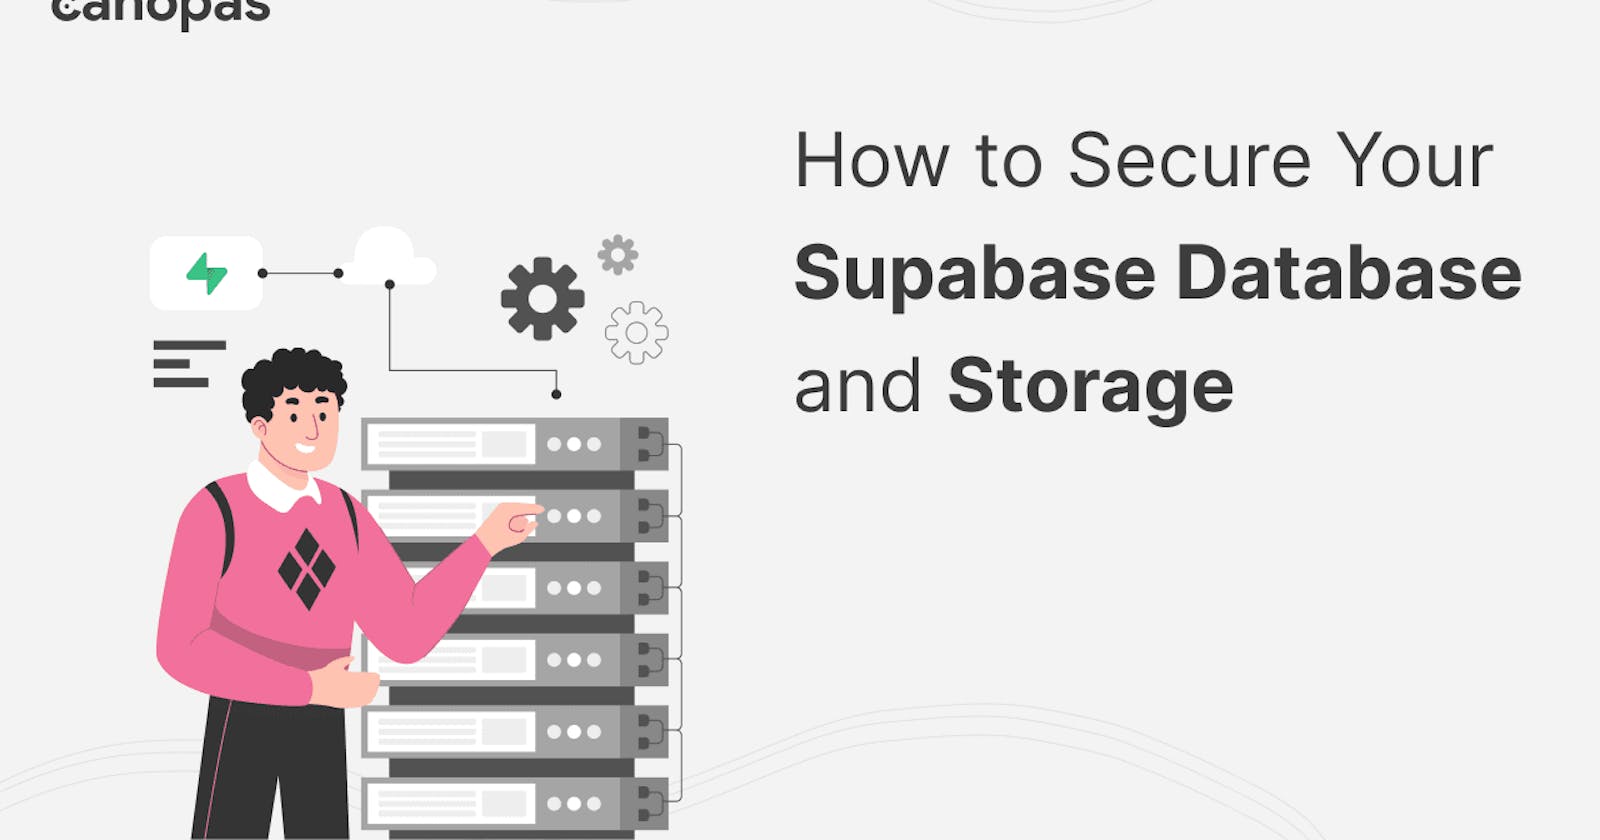 How to Secure Your Supabase Database and Storage